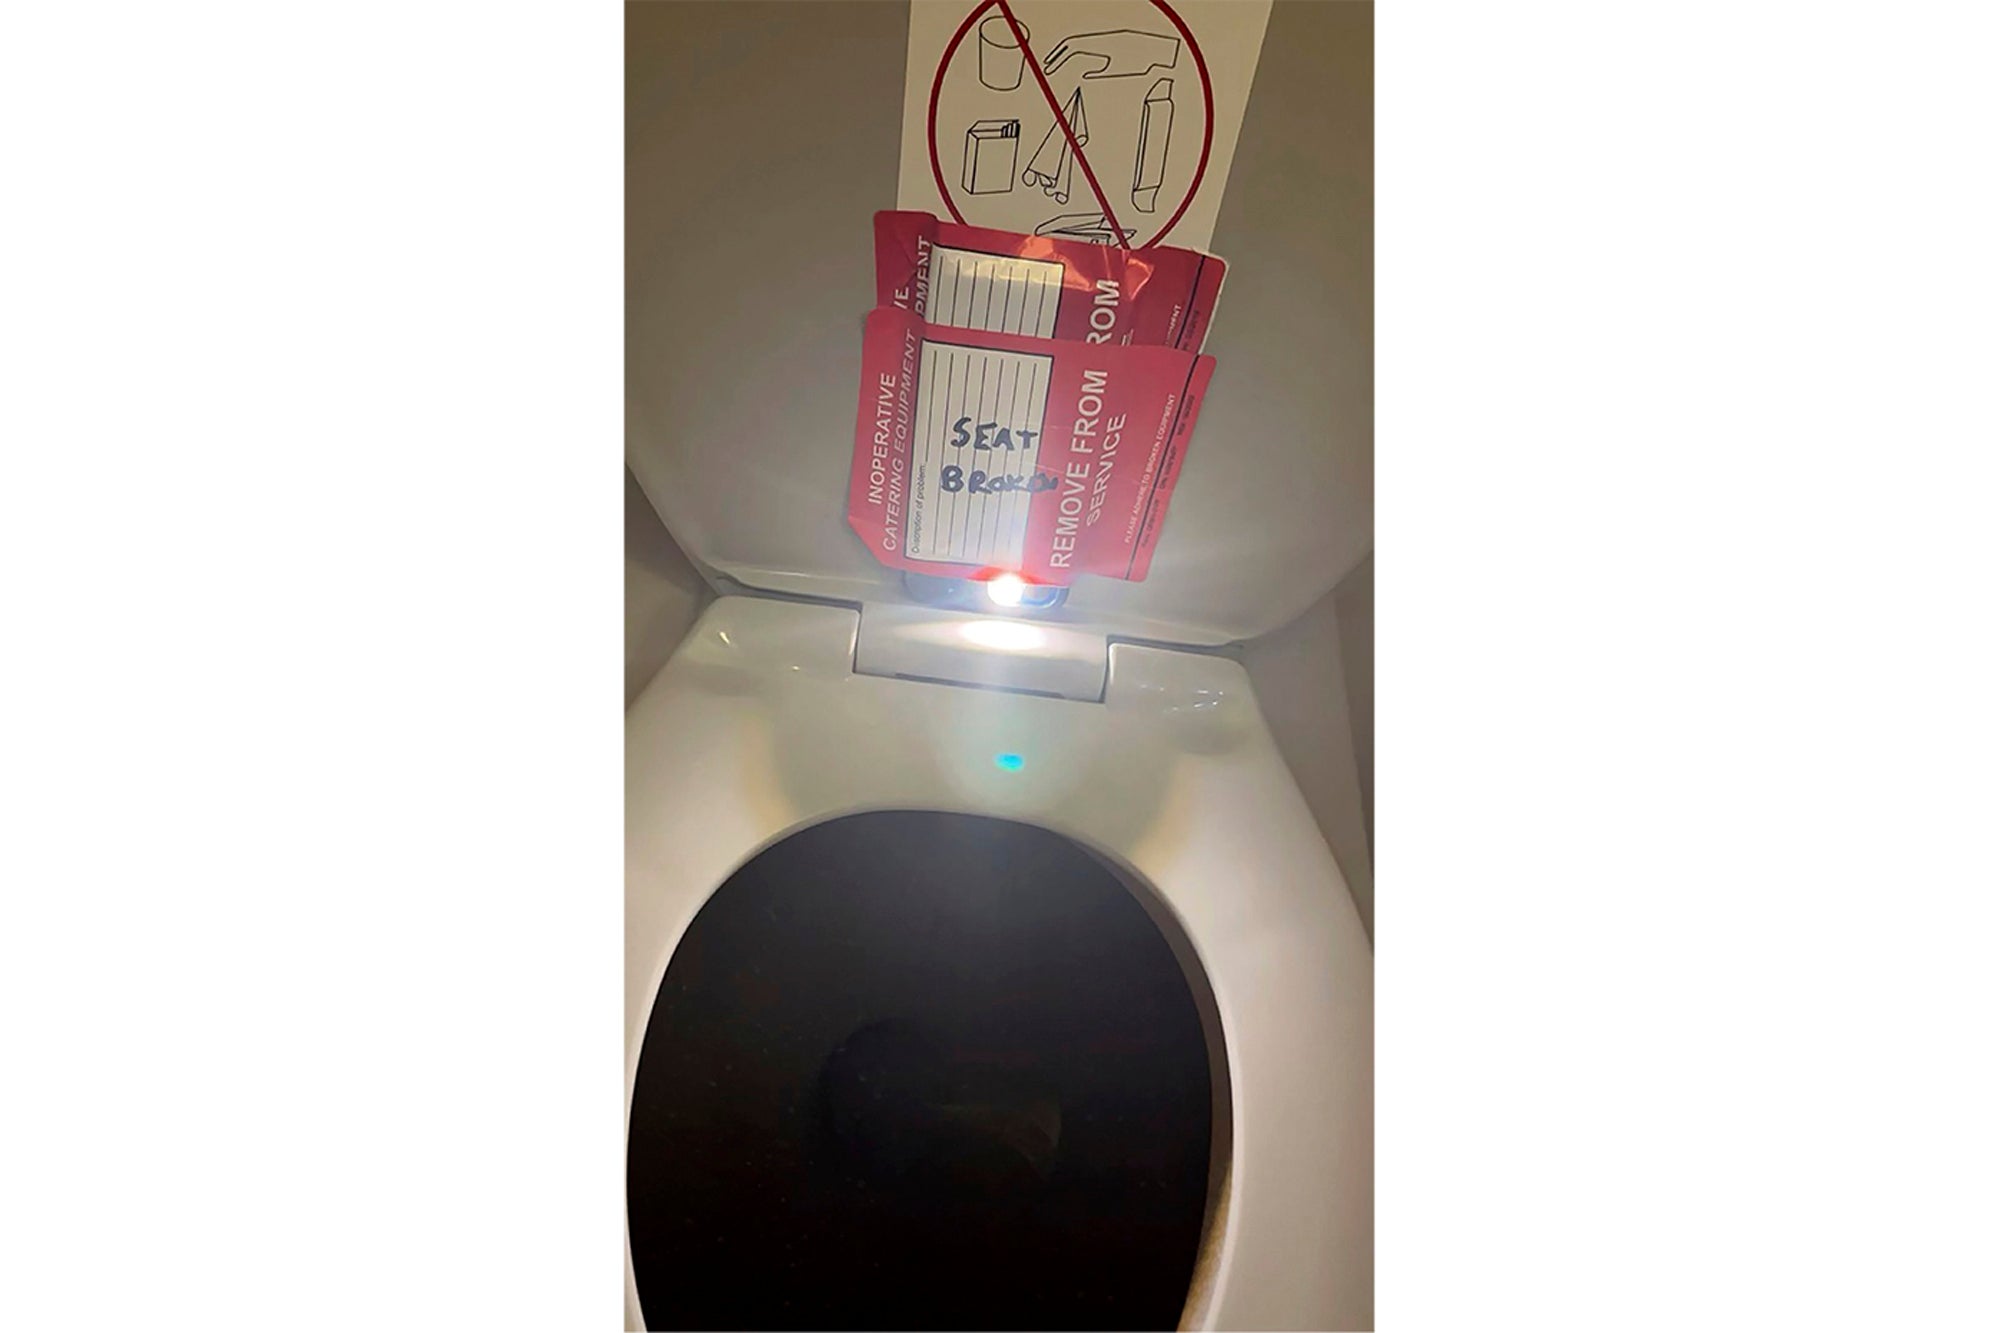 An iPhone is taped to the back of a toilet seat on an American Airlines flight